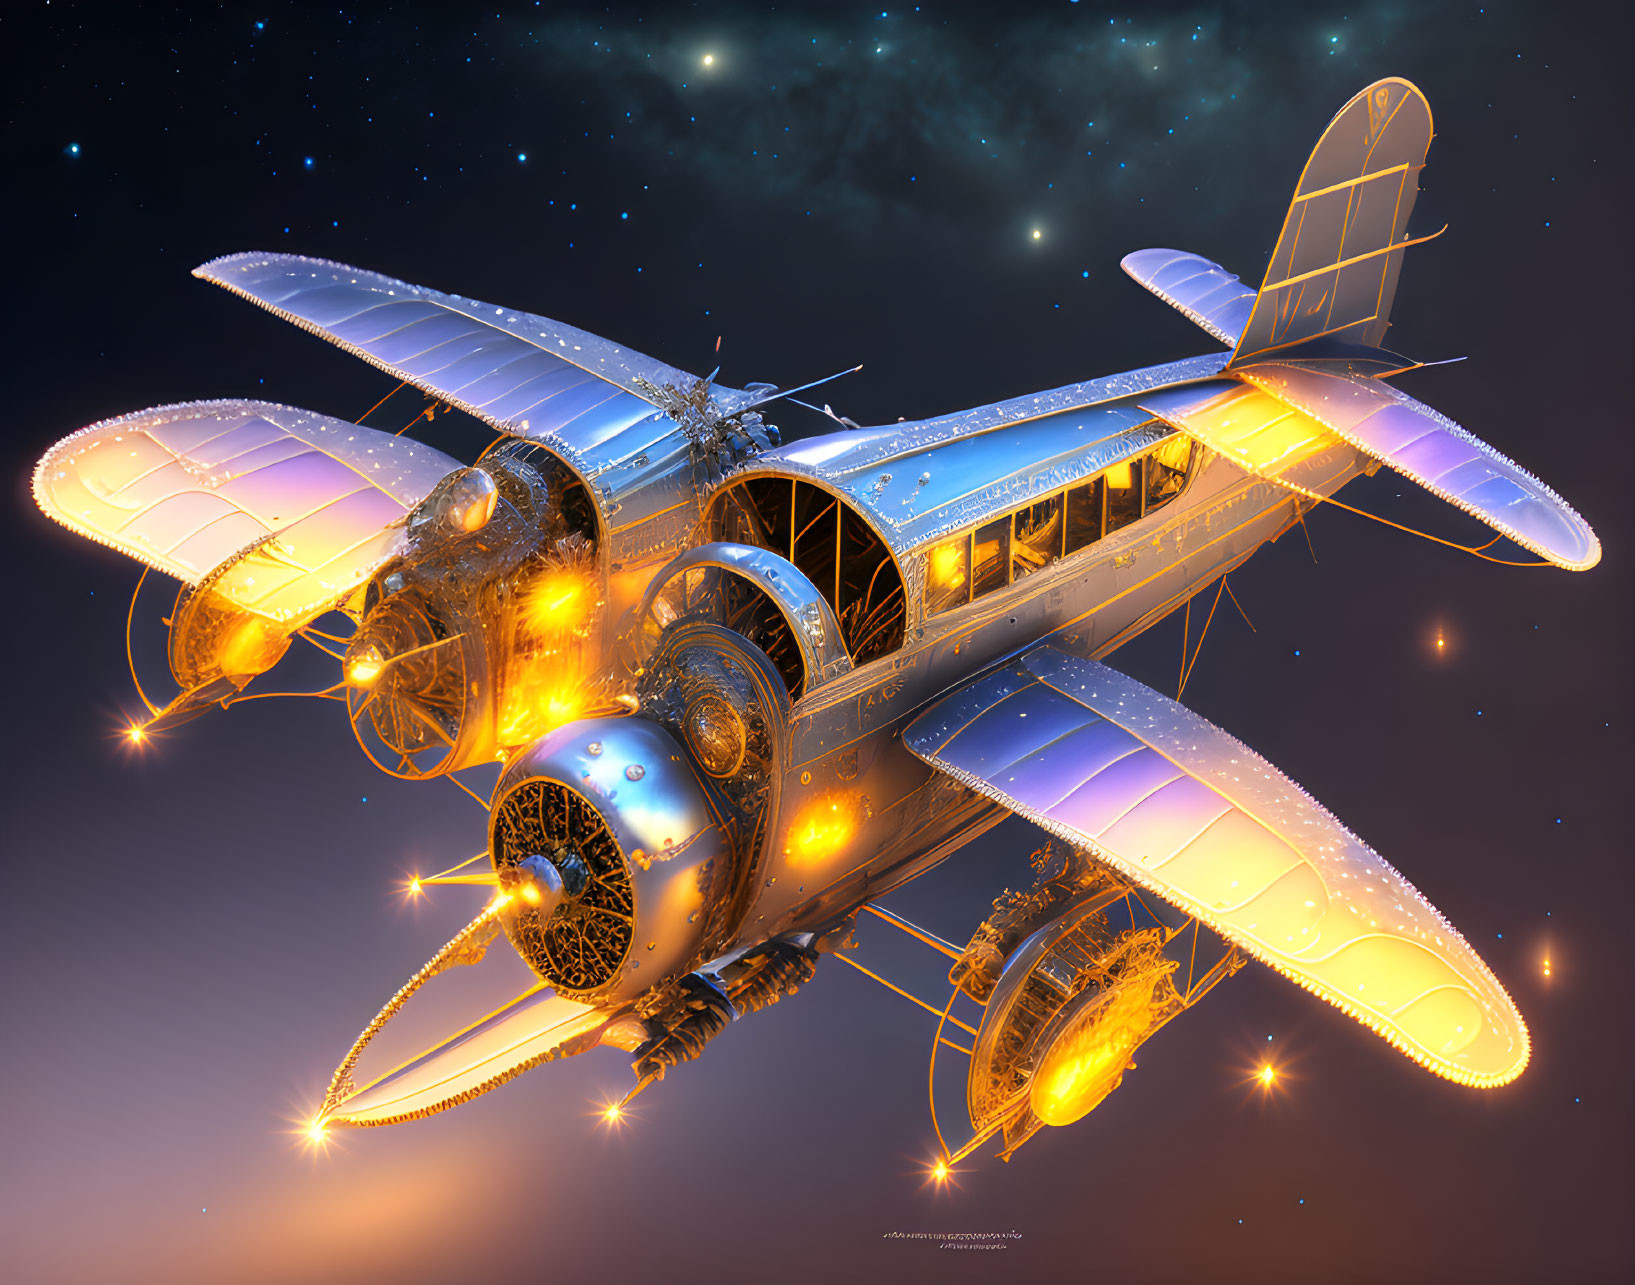 Detailed Steampunk Aircraft with Exposed Mechanics on Starry Sky Background